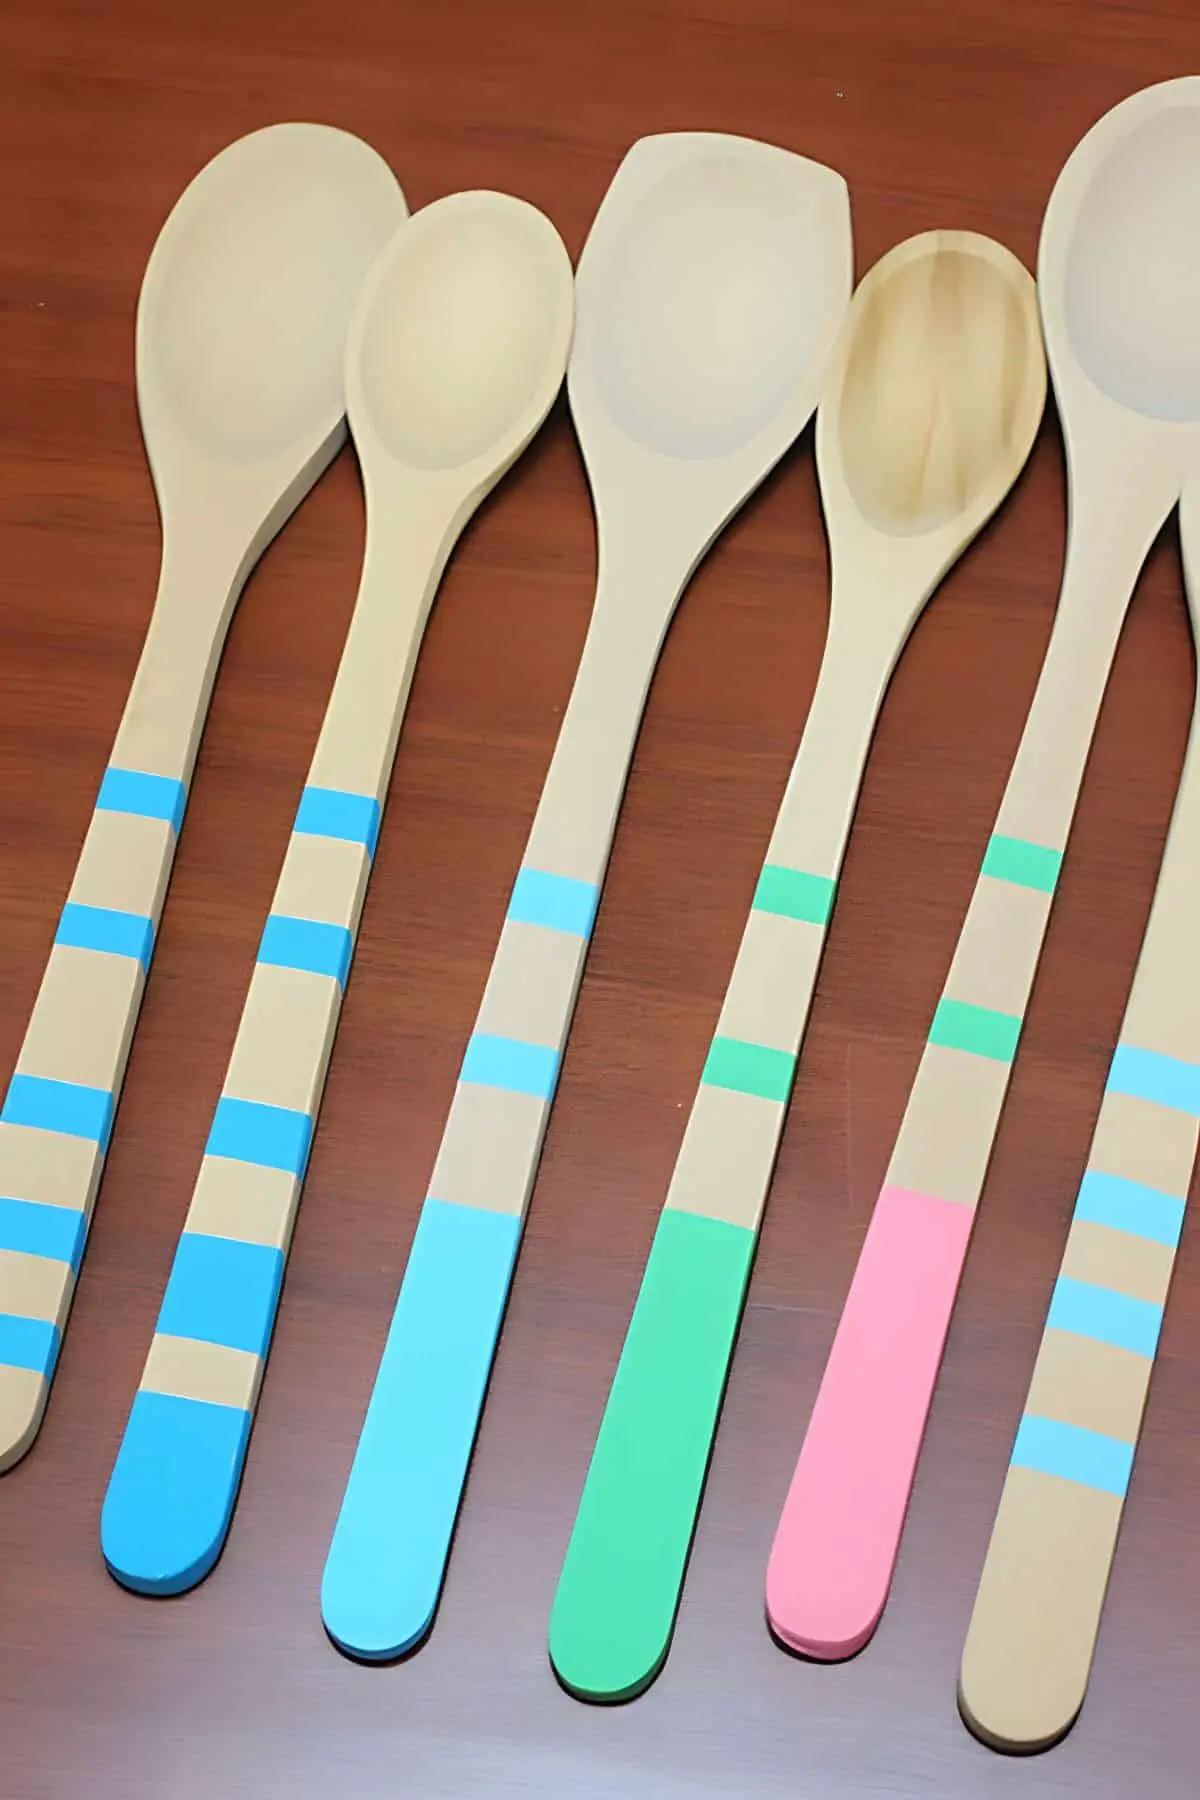 Wooden spoons that have been hand painted on the handles.